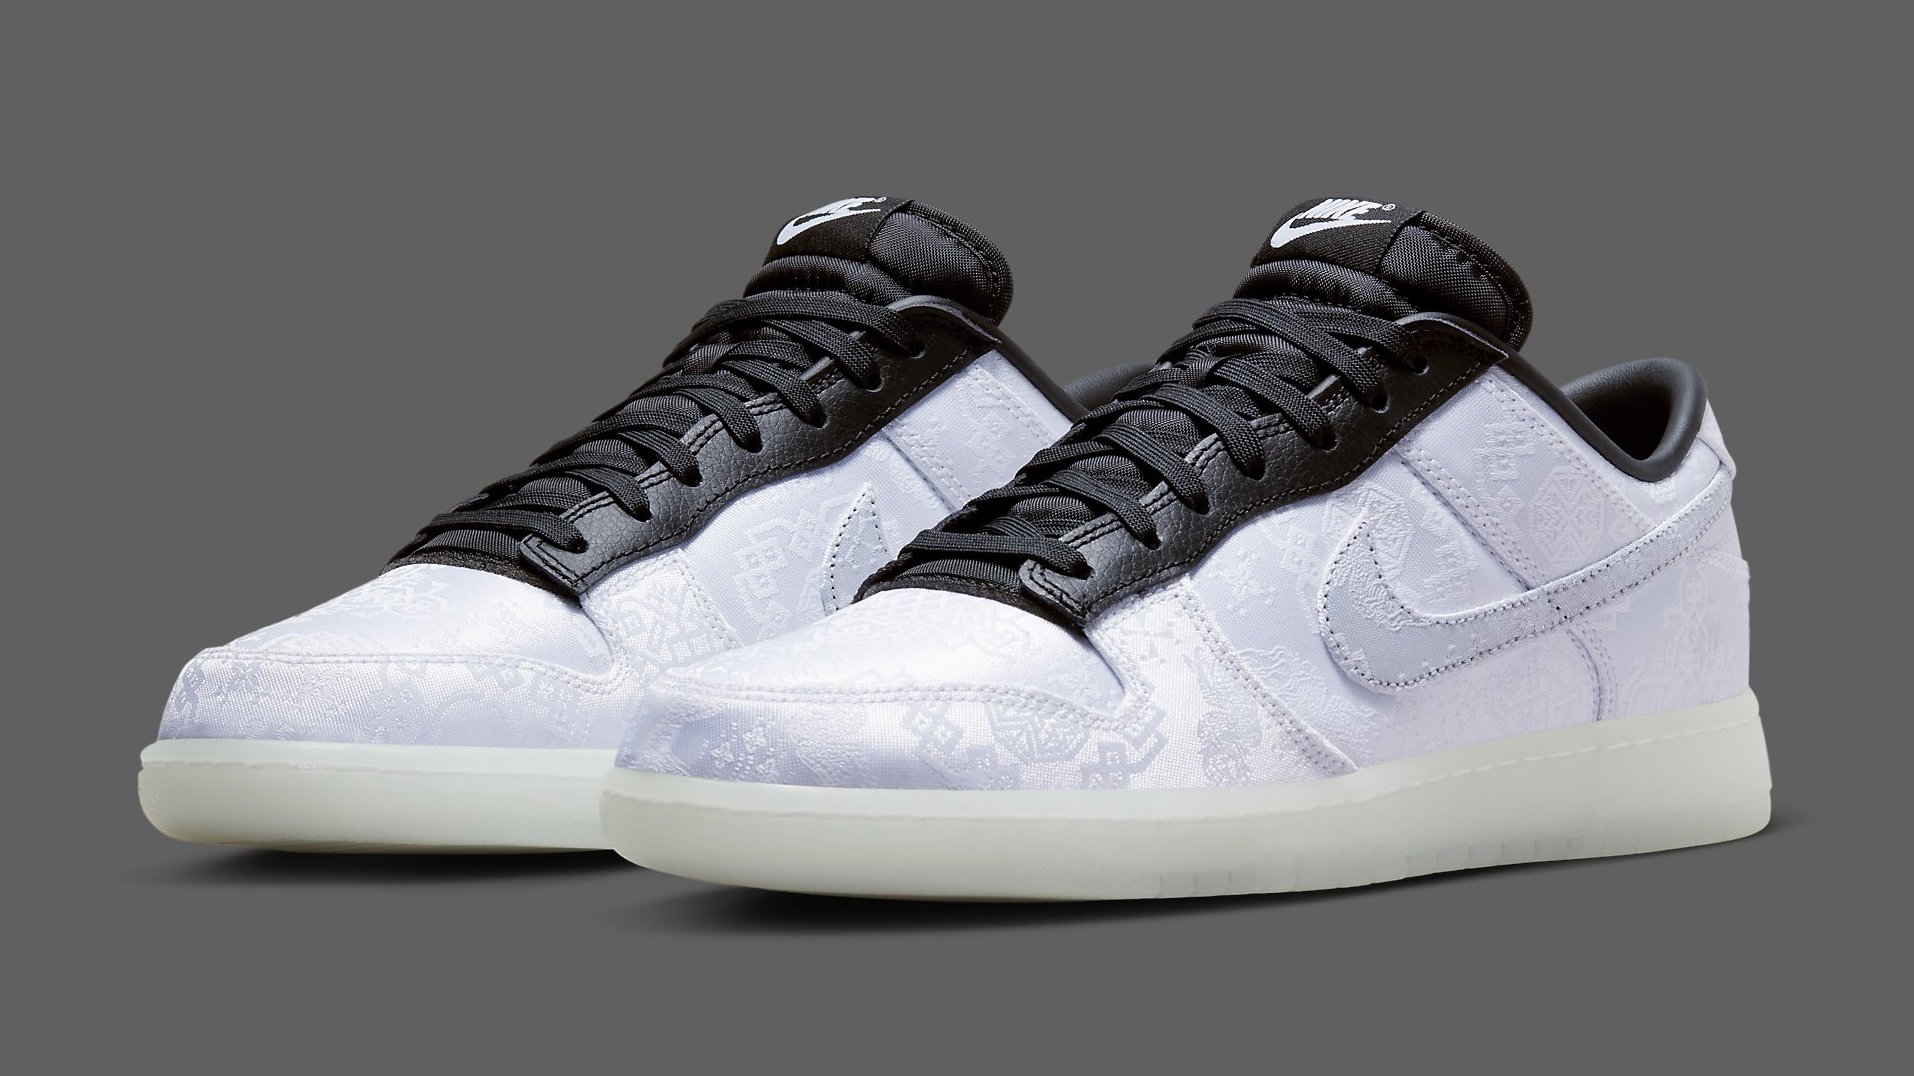 This Clot x Fragment x Nike Dunk Releases Next Week